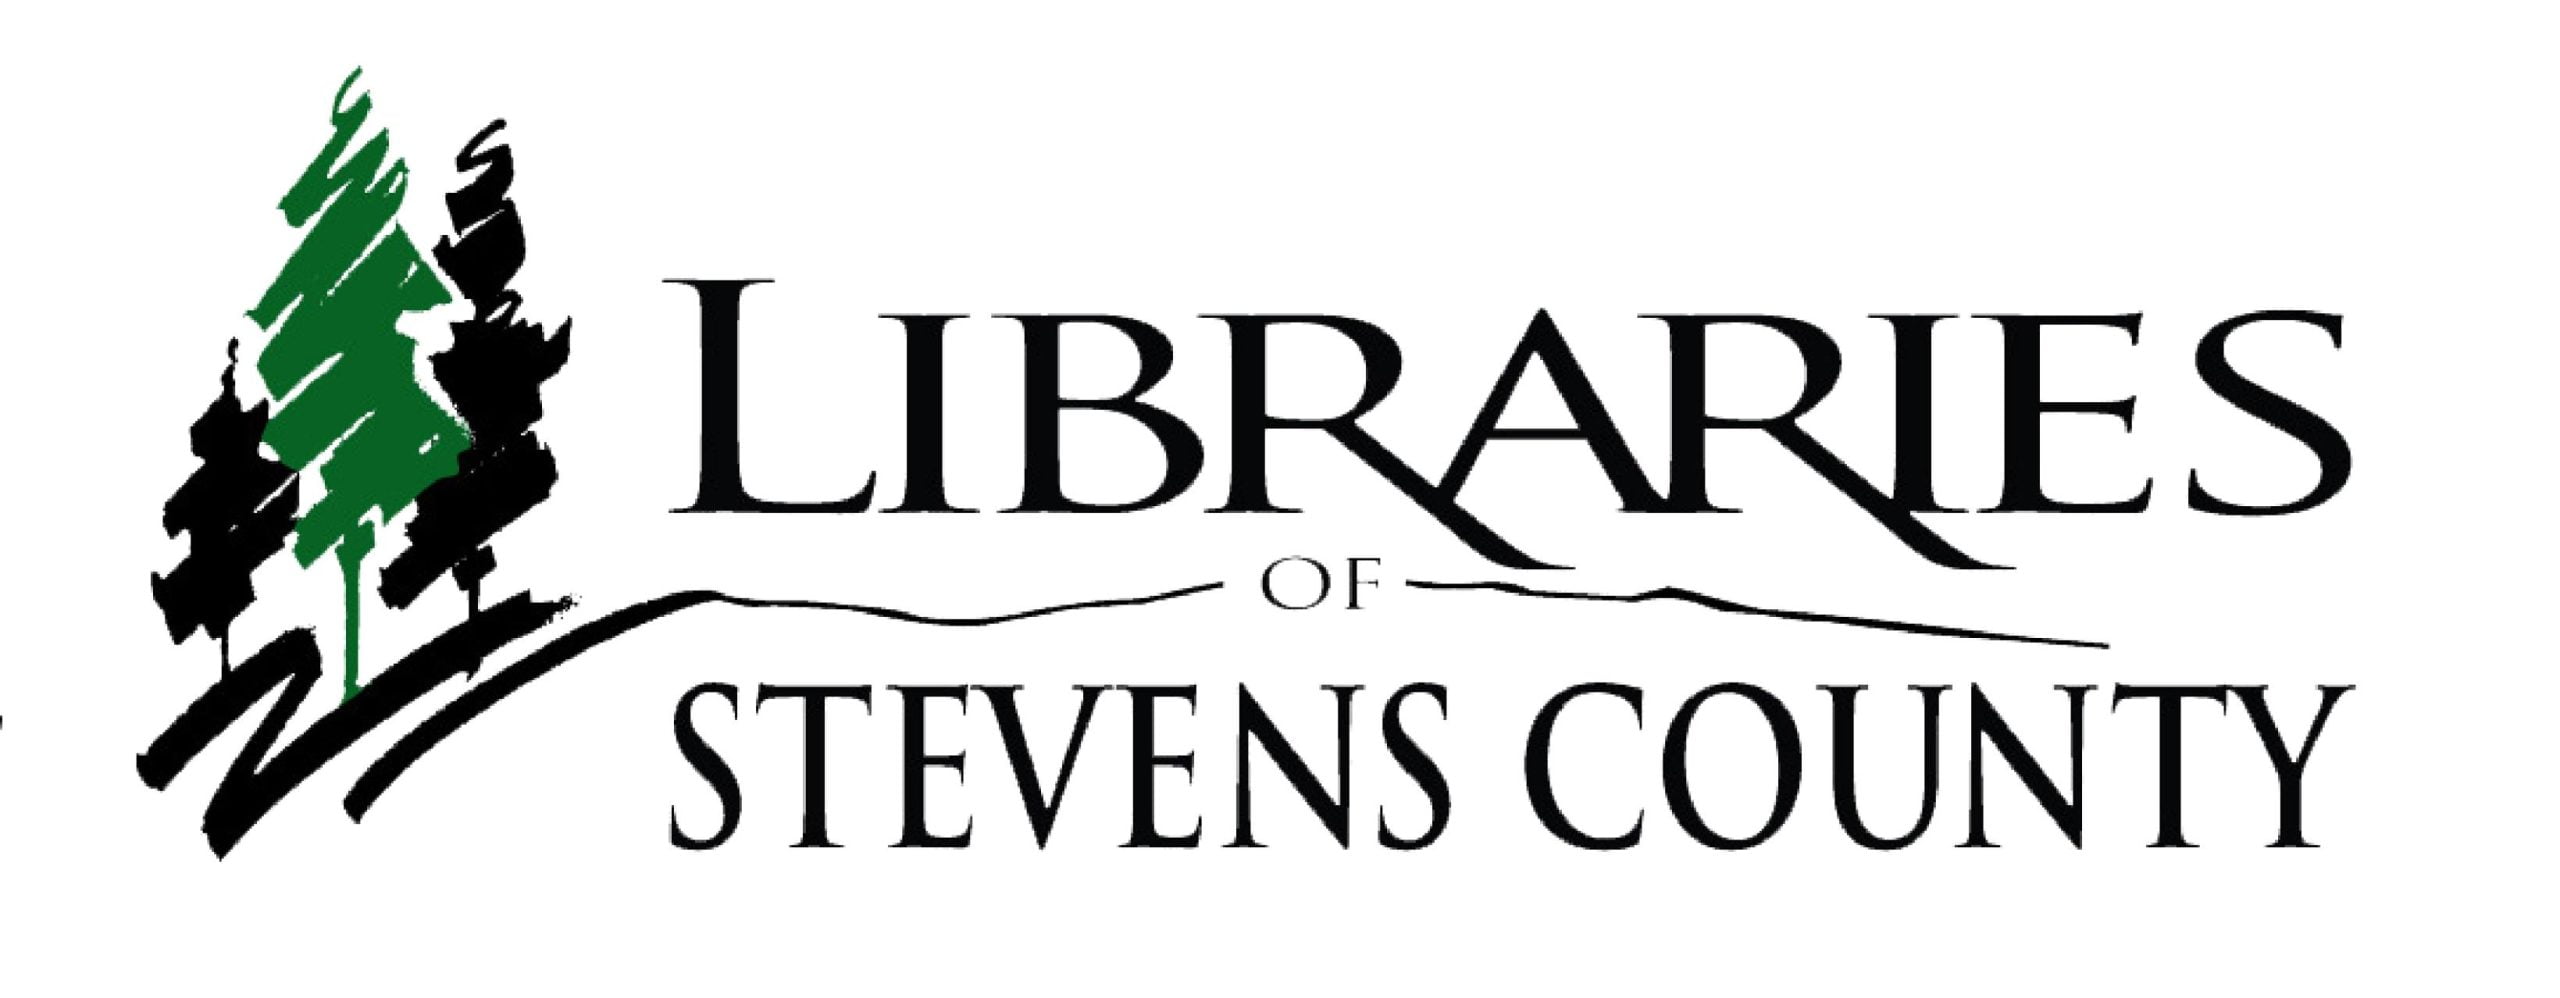 Libraries of Steven County